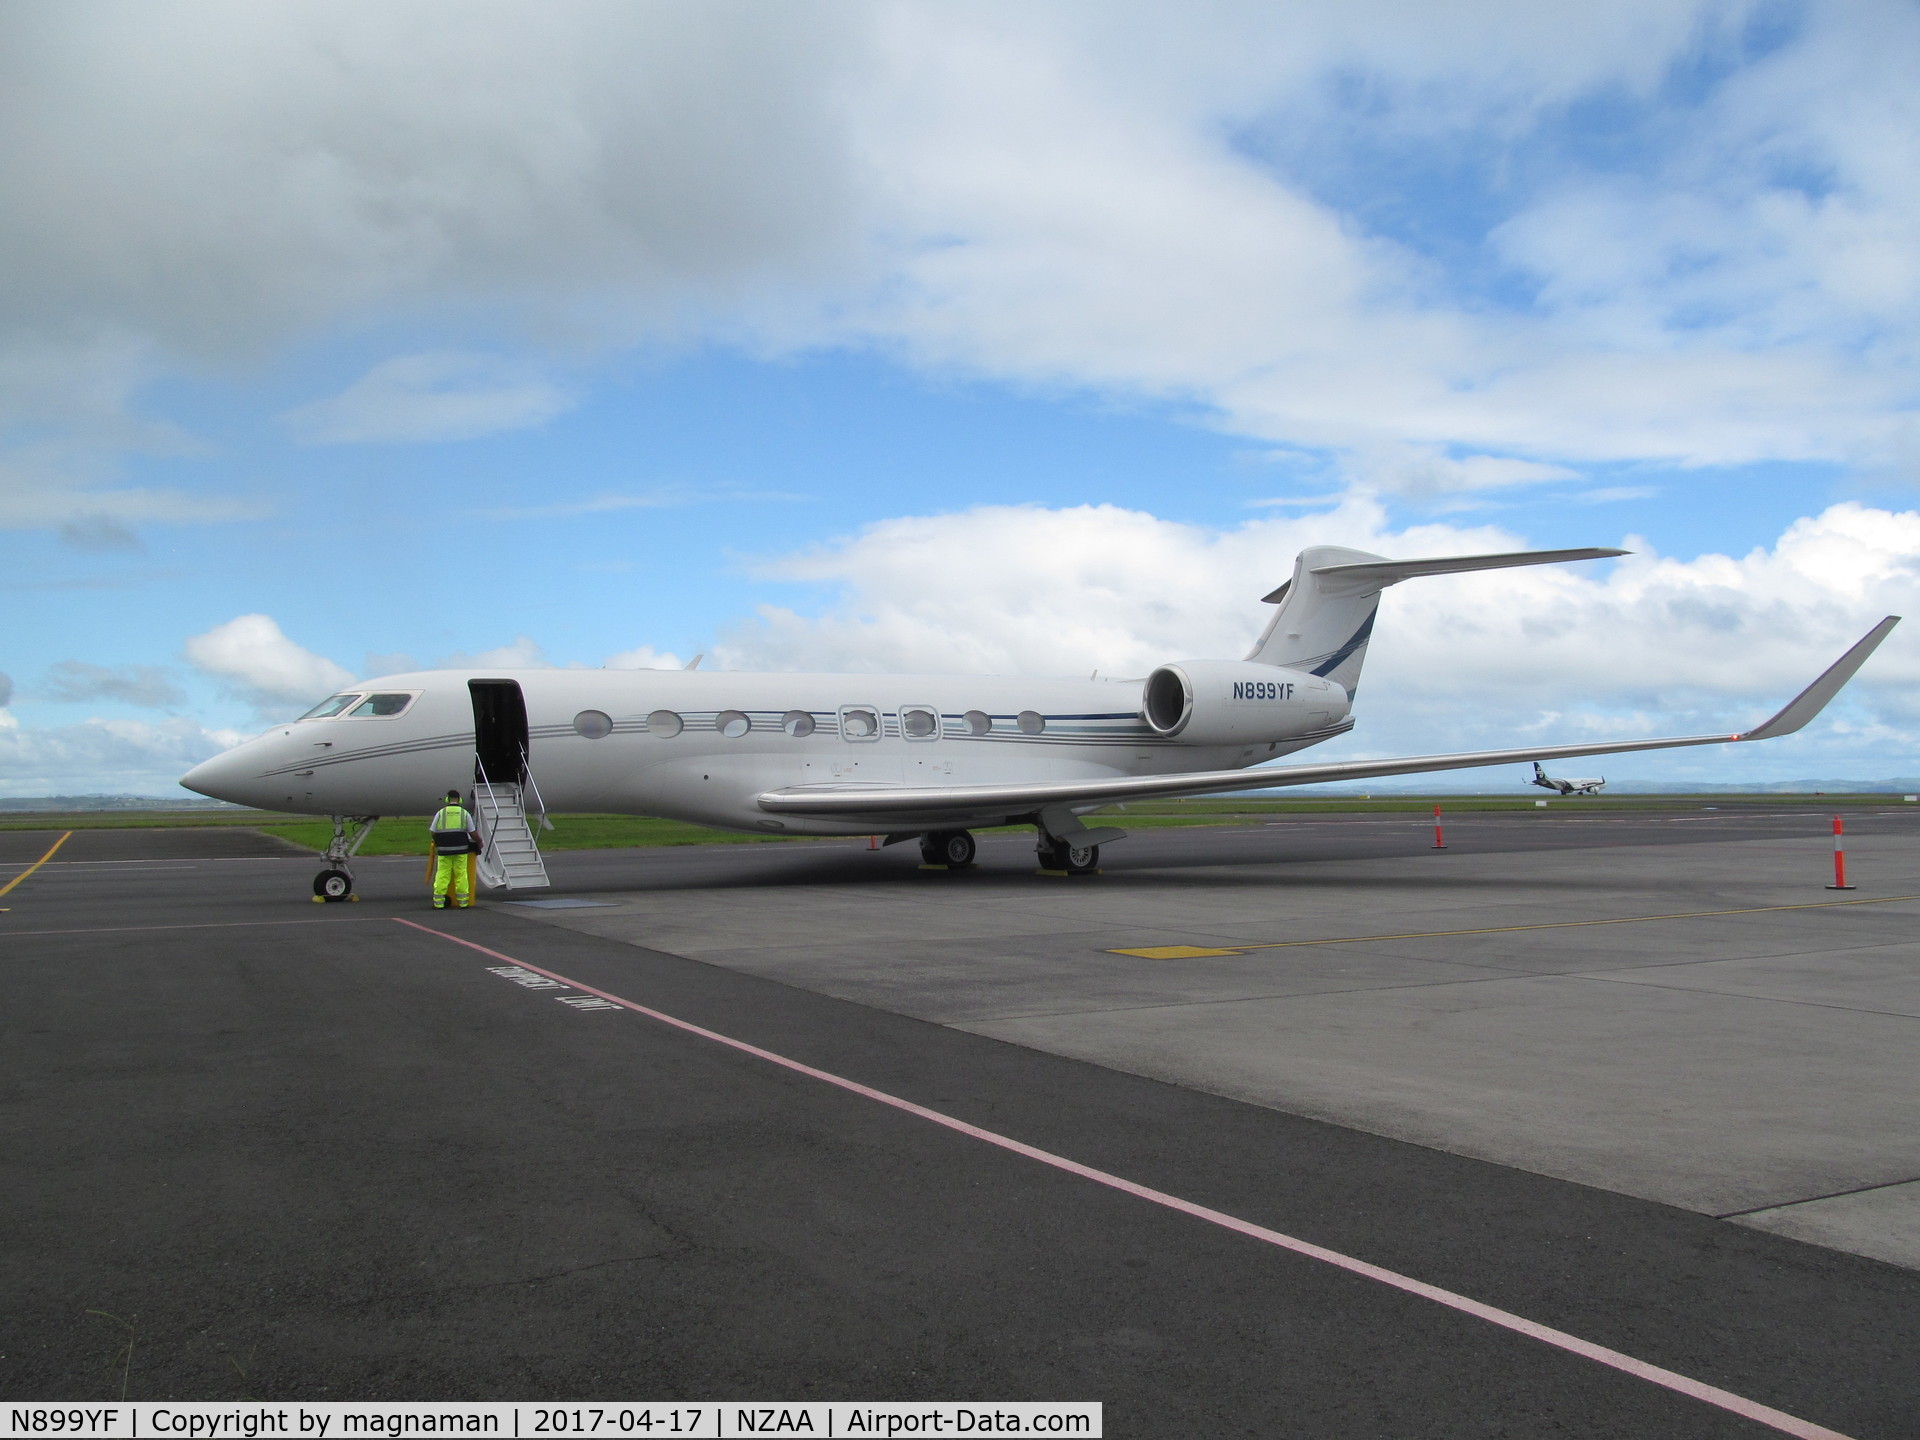 N899YF, 2015 Gulfstream Aerospace G650 (G-VI) C/N 6127, just arrived at AKL having come from Oz and routed all way up coast from queenstown area.